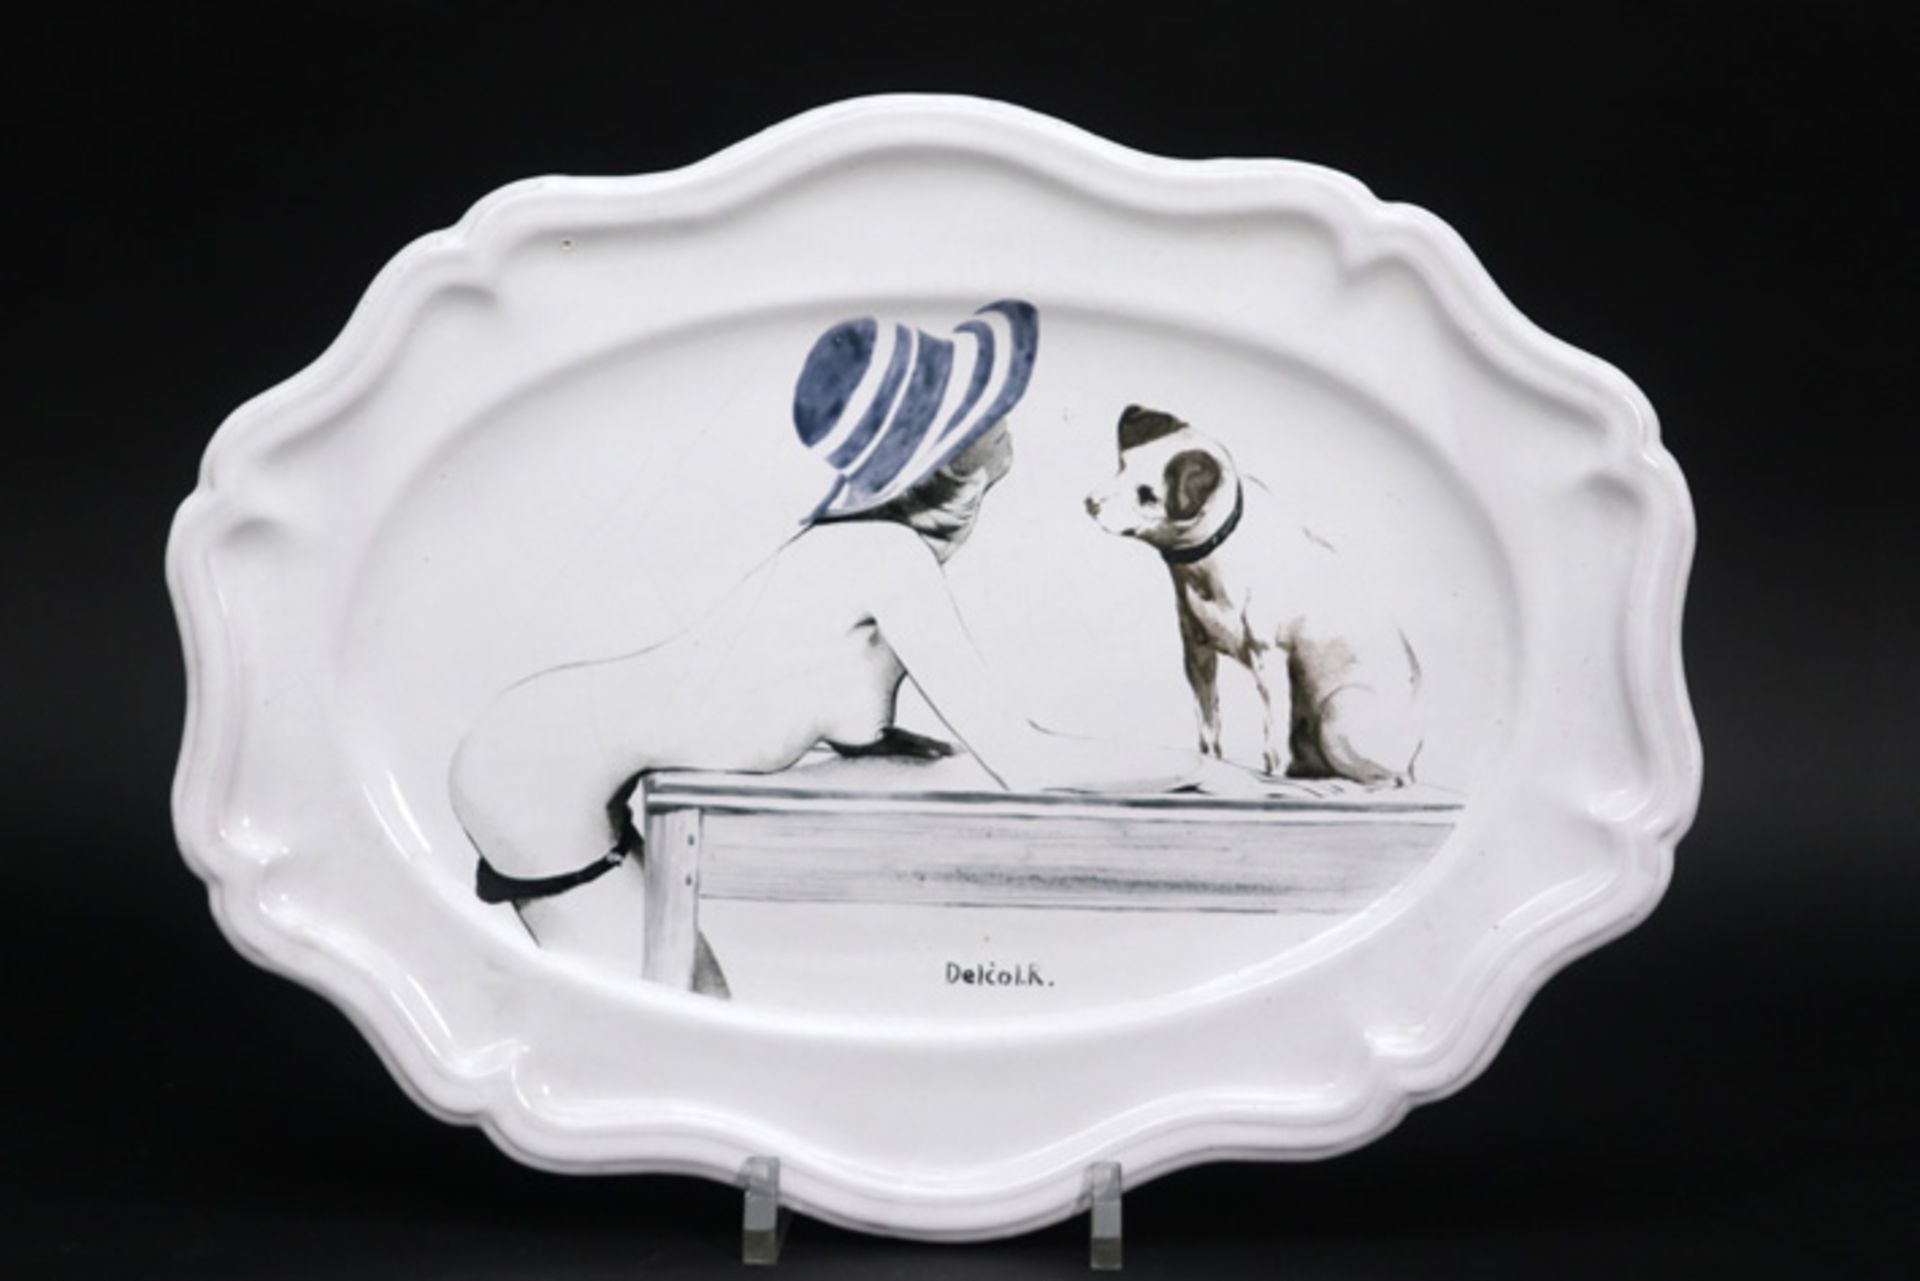 20th Cent. Belgo-French dish in "Moustiers - Ste Marie" ceramic with a hyperrealism style theme -